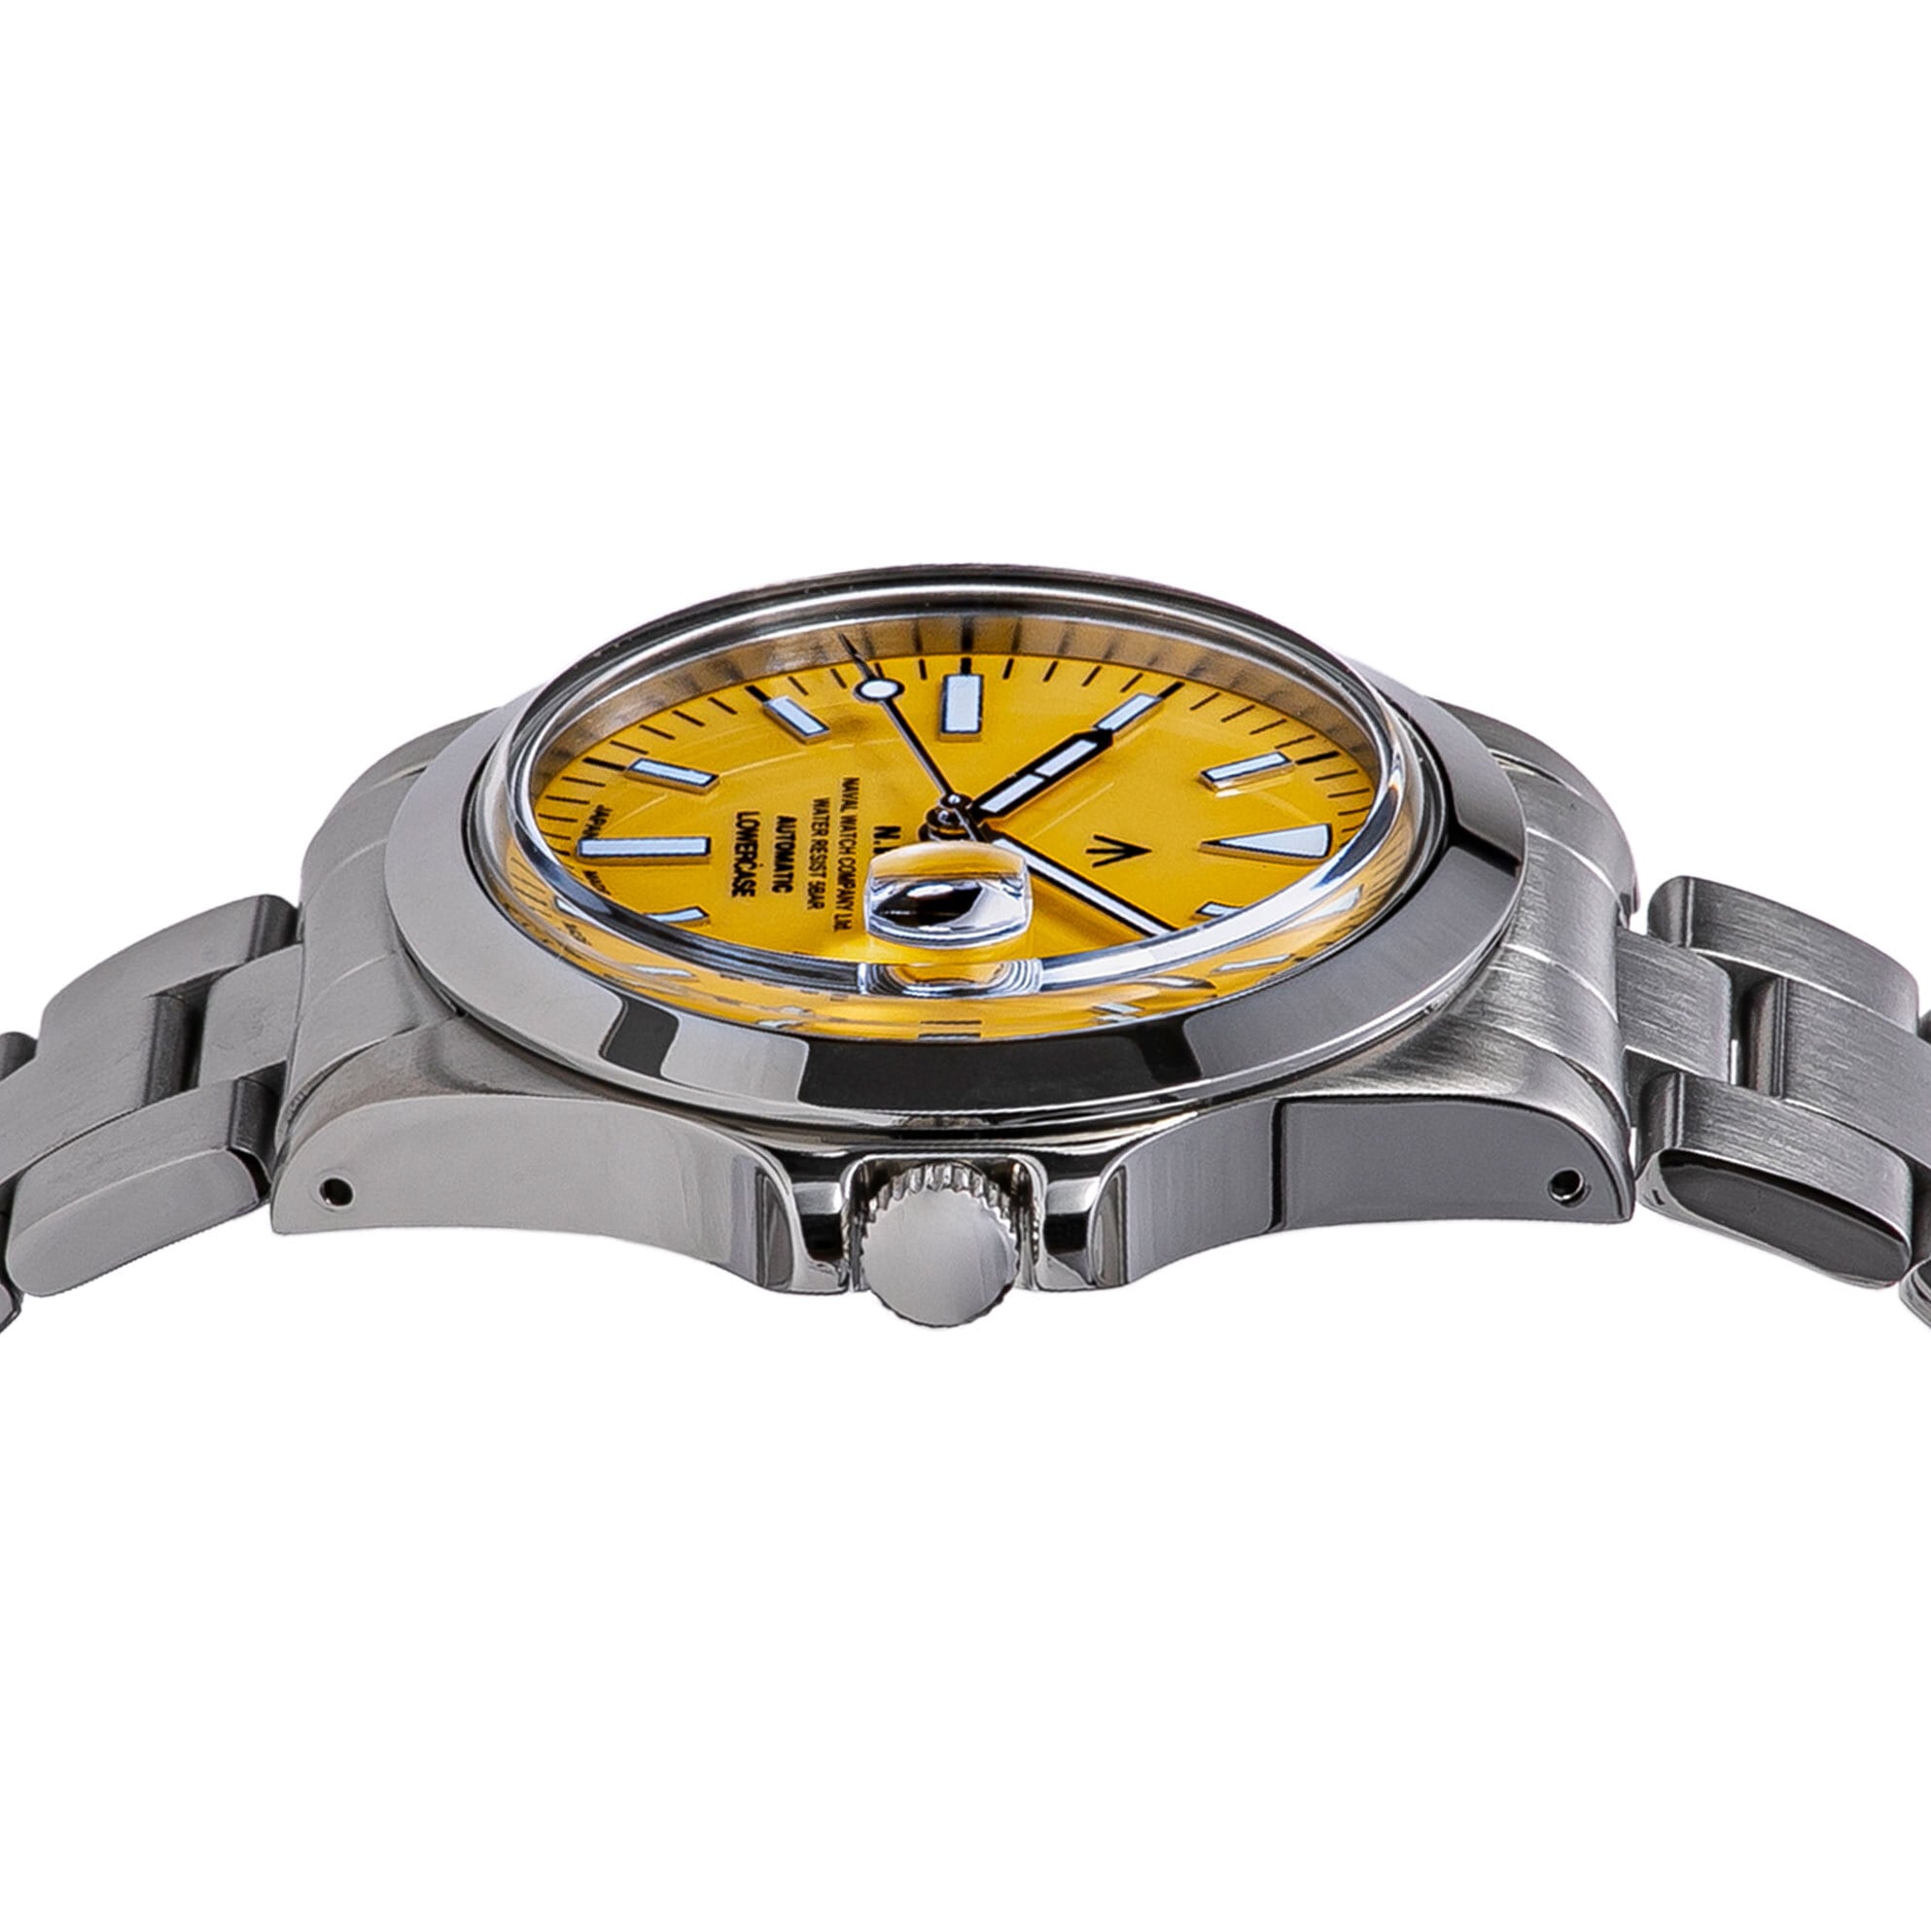 Naval Watch Produced By LOWERCASE FRXA015 Yellow Mechanical S/S 3 links  Metal band | Naval Watch Swiss powered by BASE